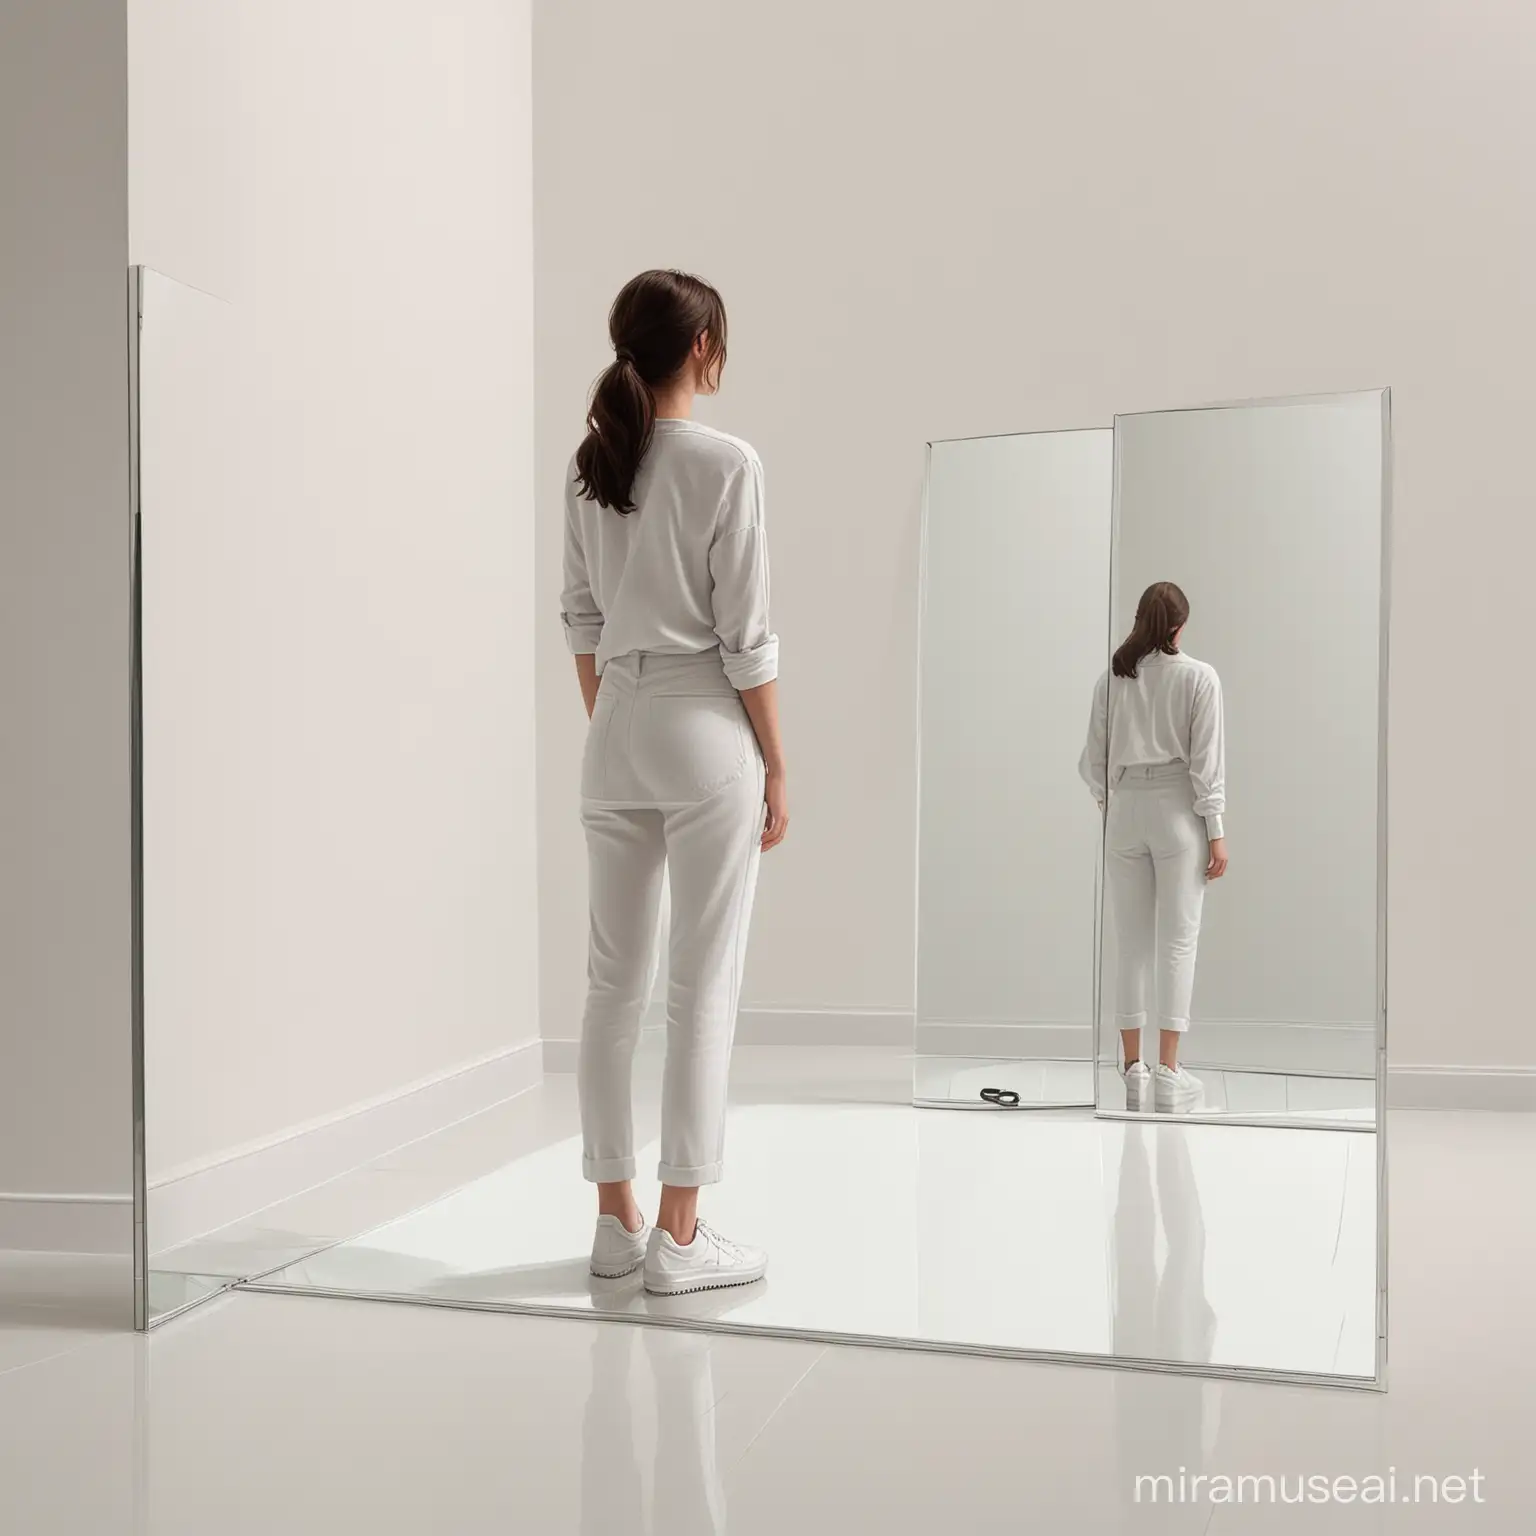 A cartoon of a woman dressed in modern clothes 
standing with back to us, looking into a mirror from 10 feet away, the reflection is blank, the background is all white with shadows on the white floor.